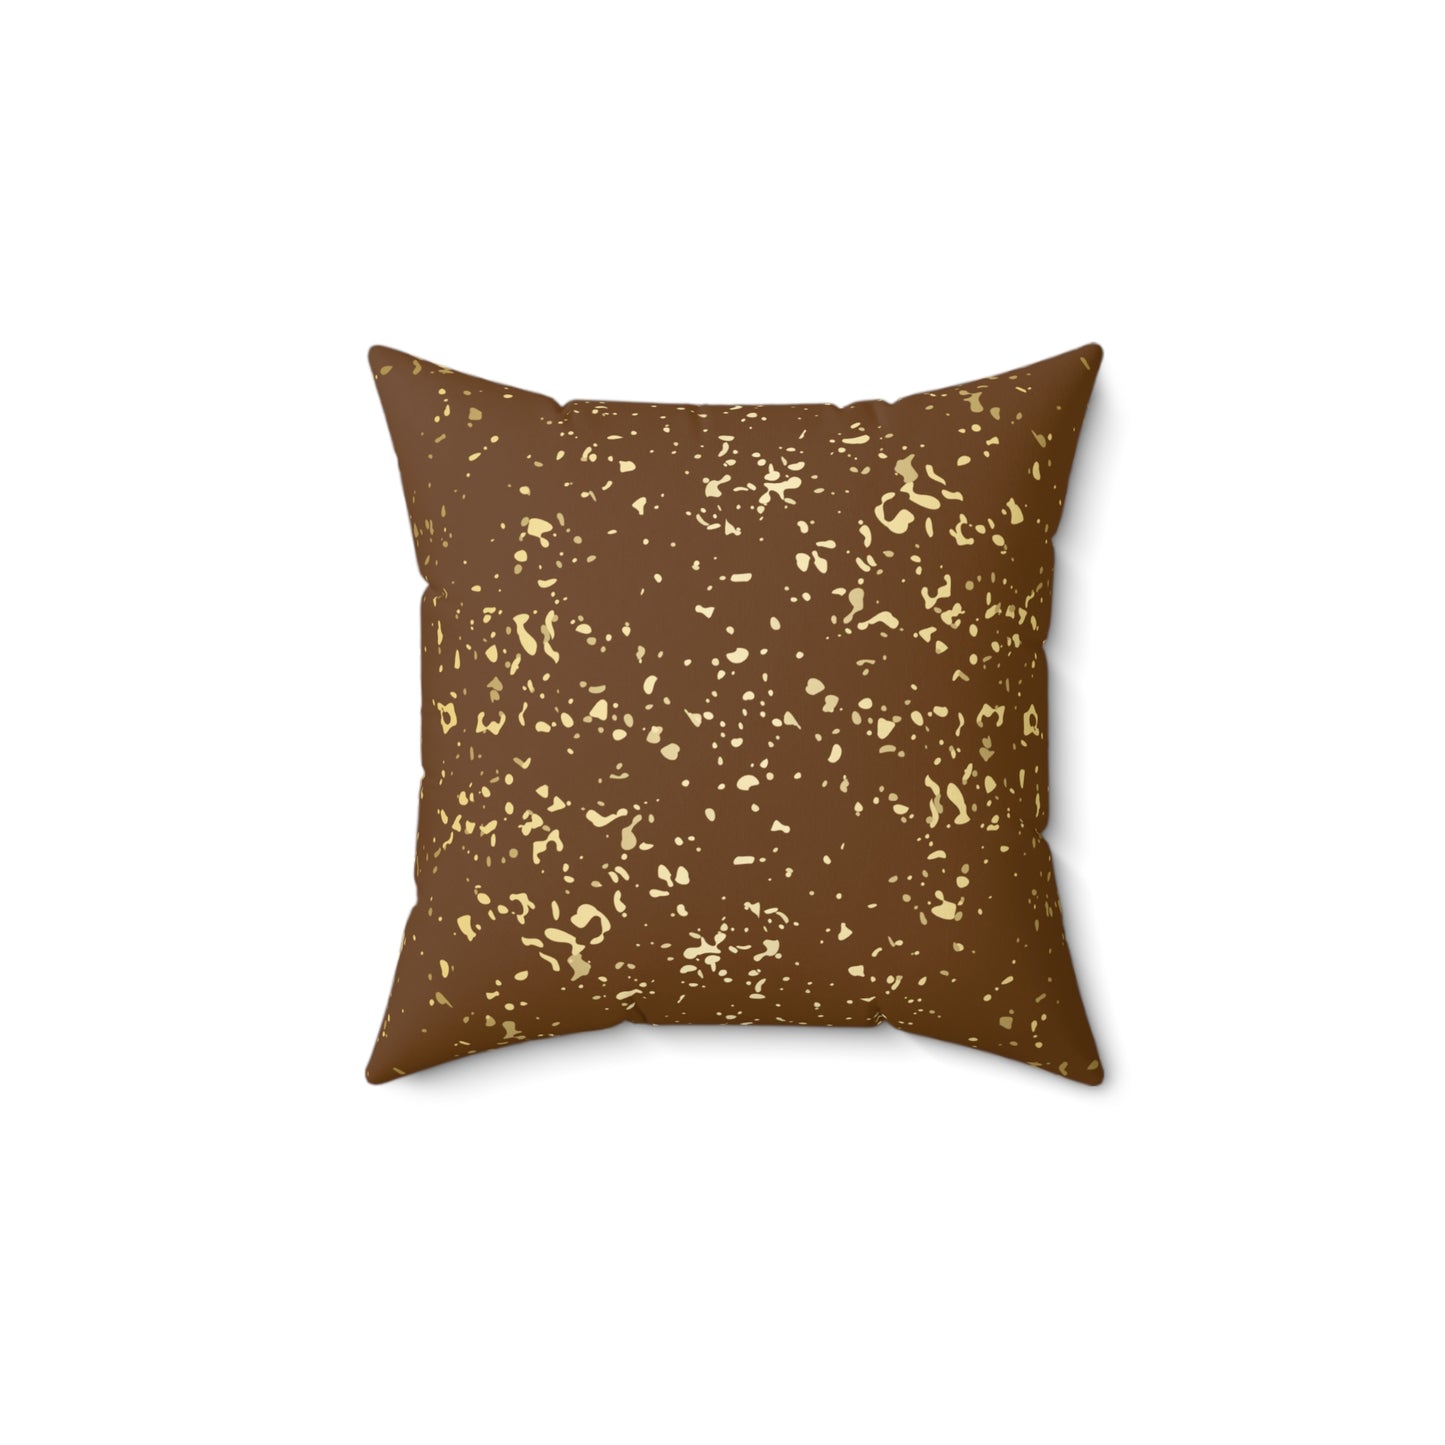 Brown and Gold Flake Throw Pillow